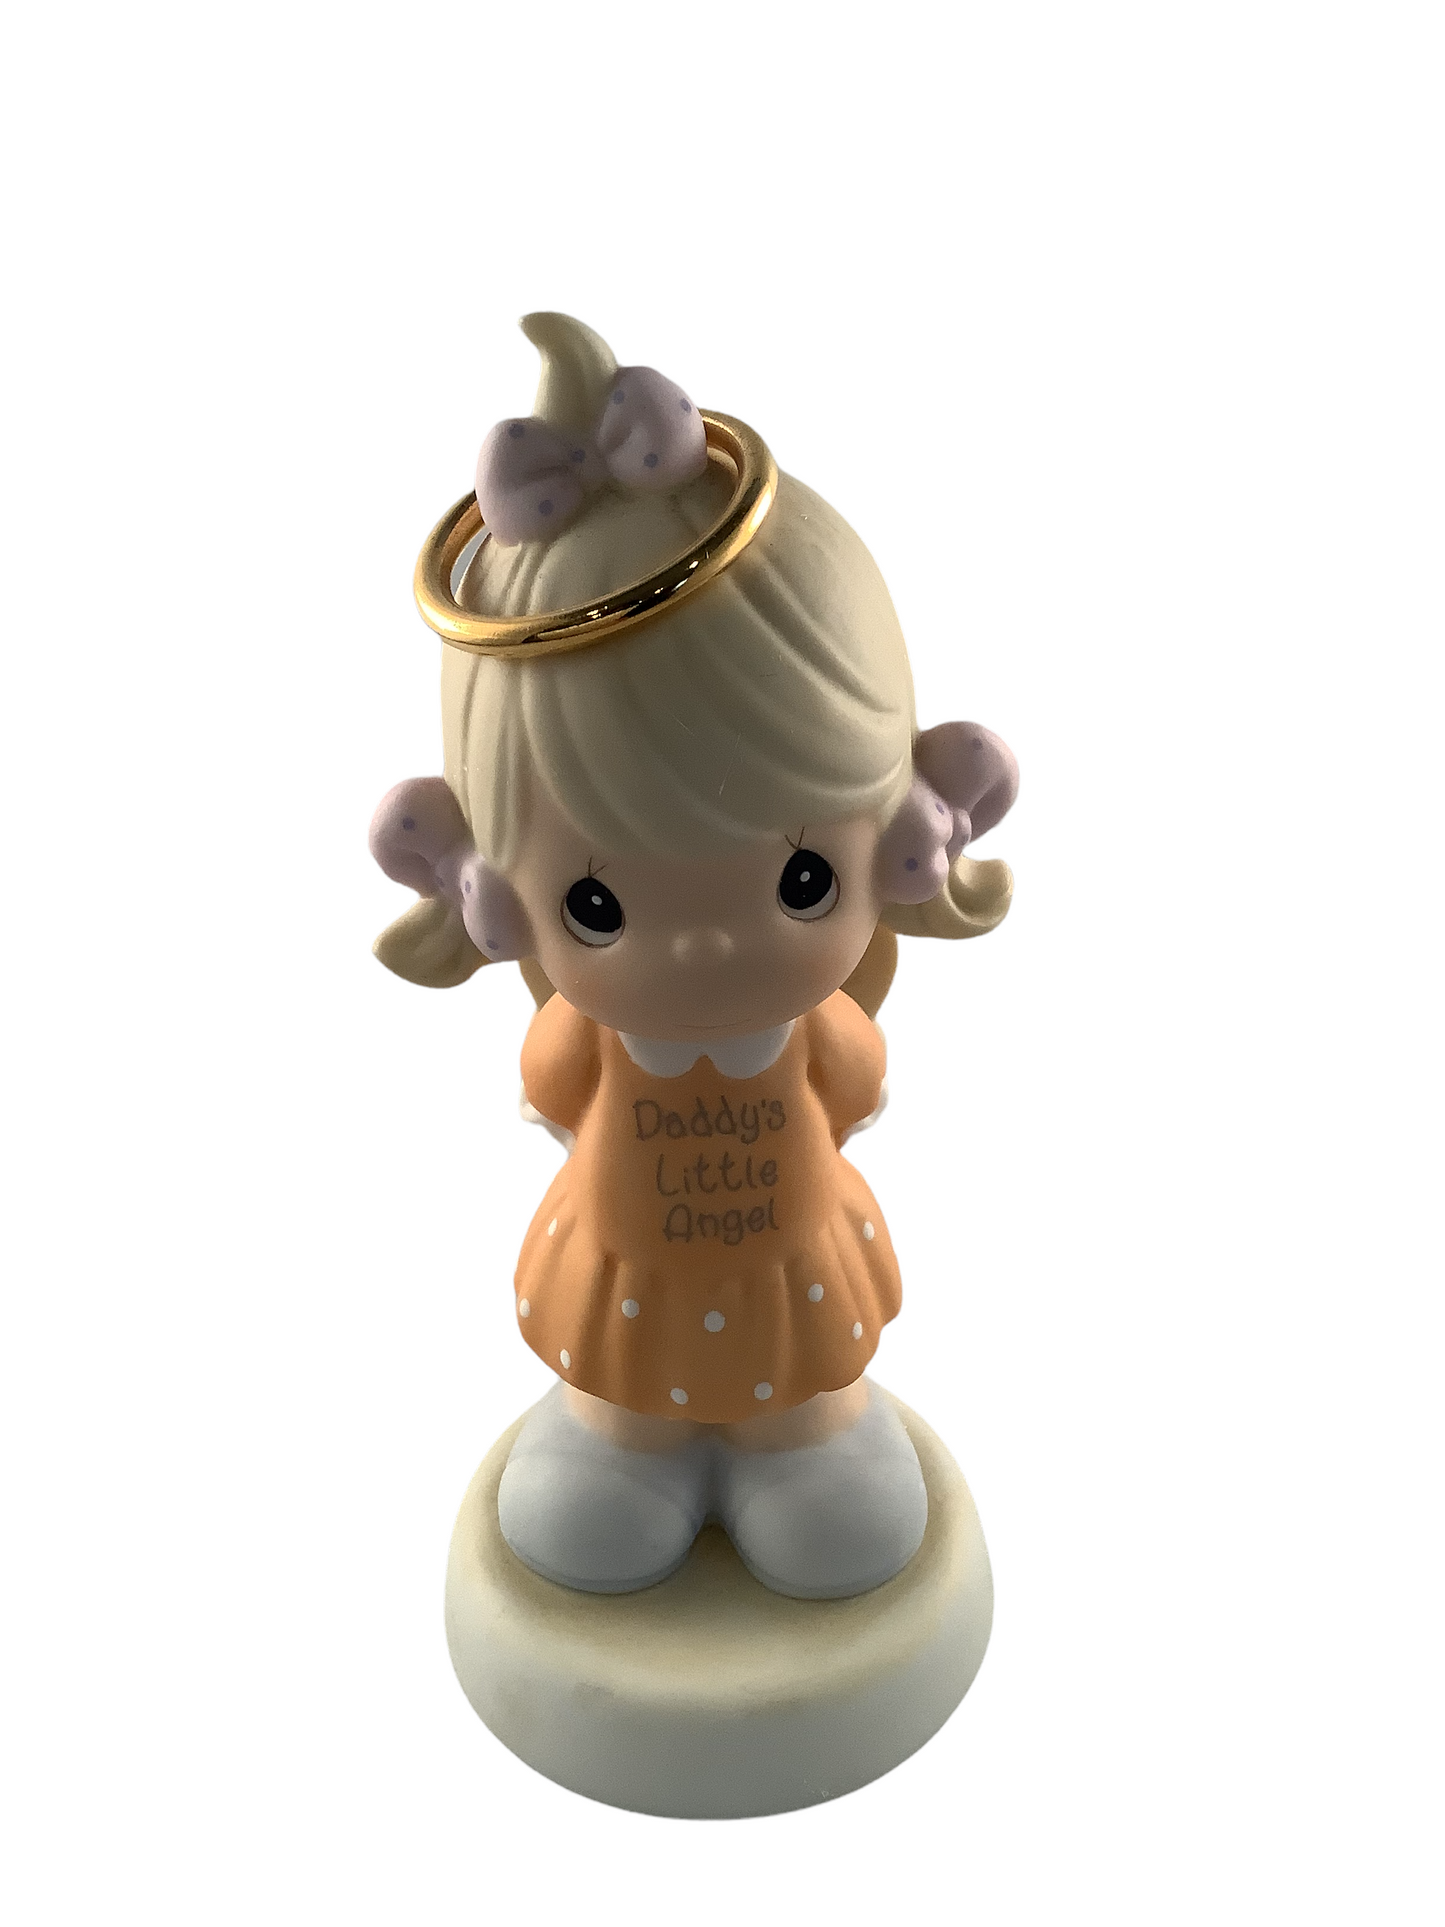 Daddy's Little Angel - Precious Moments Figurine